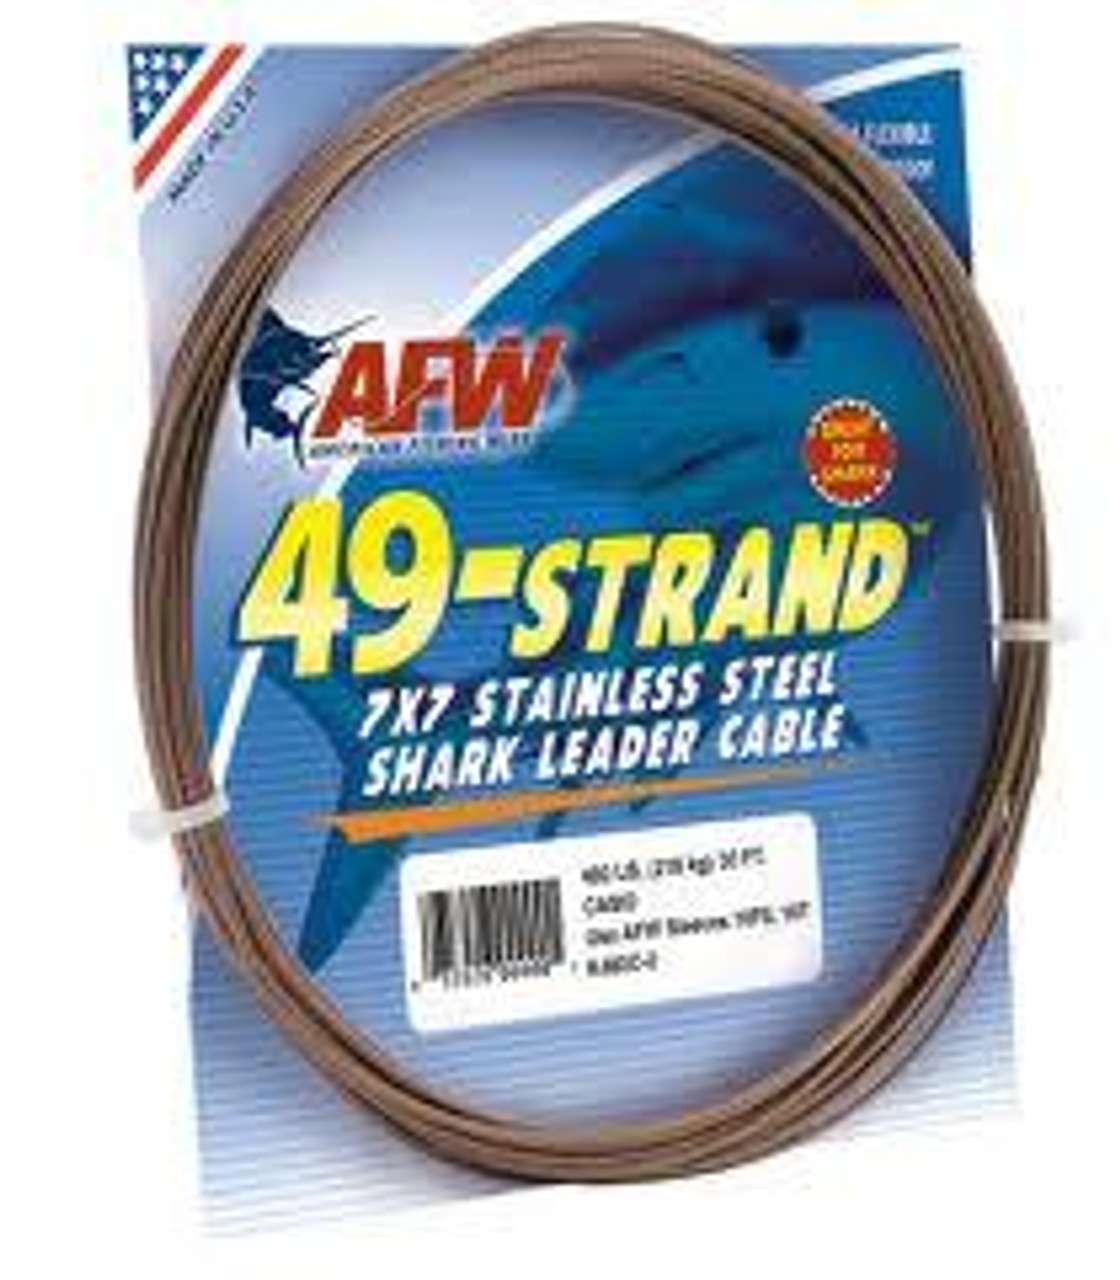 AFW 49 Strand 7x7 Stainless Steel Shark Leader Cable 30ft